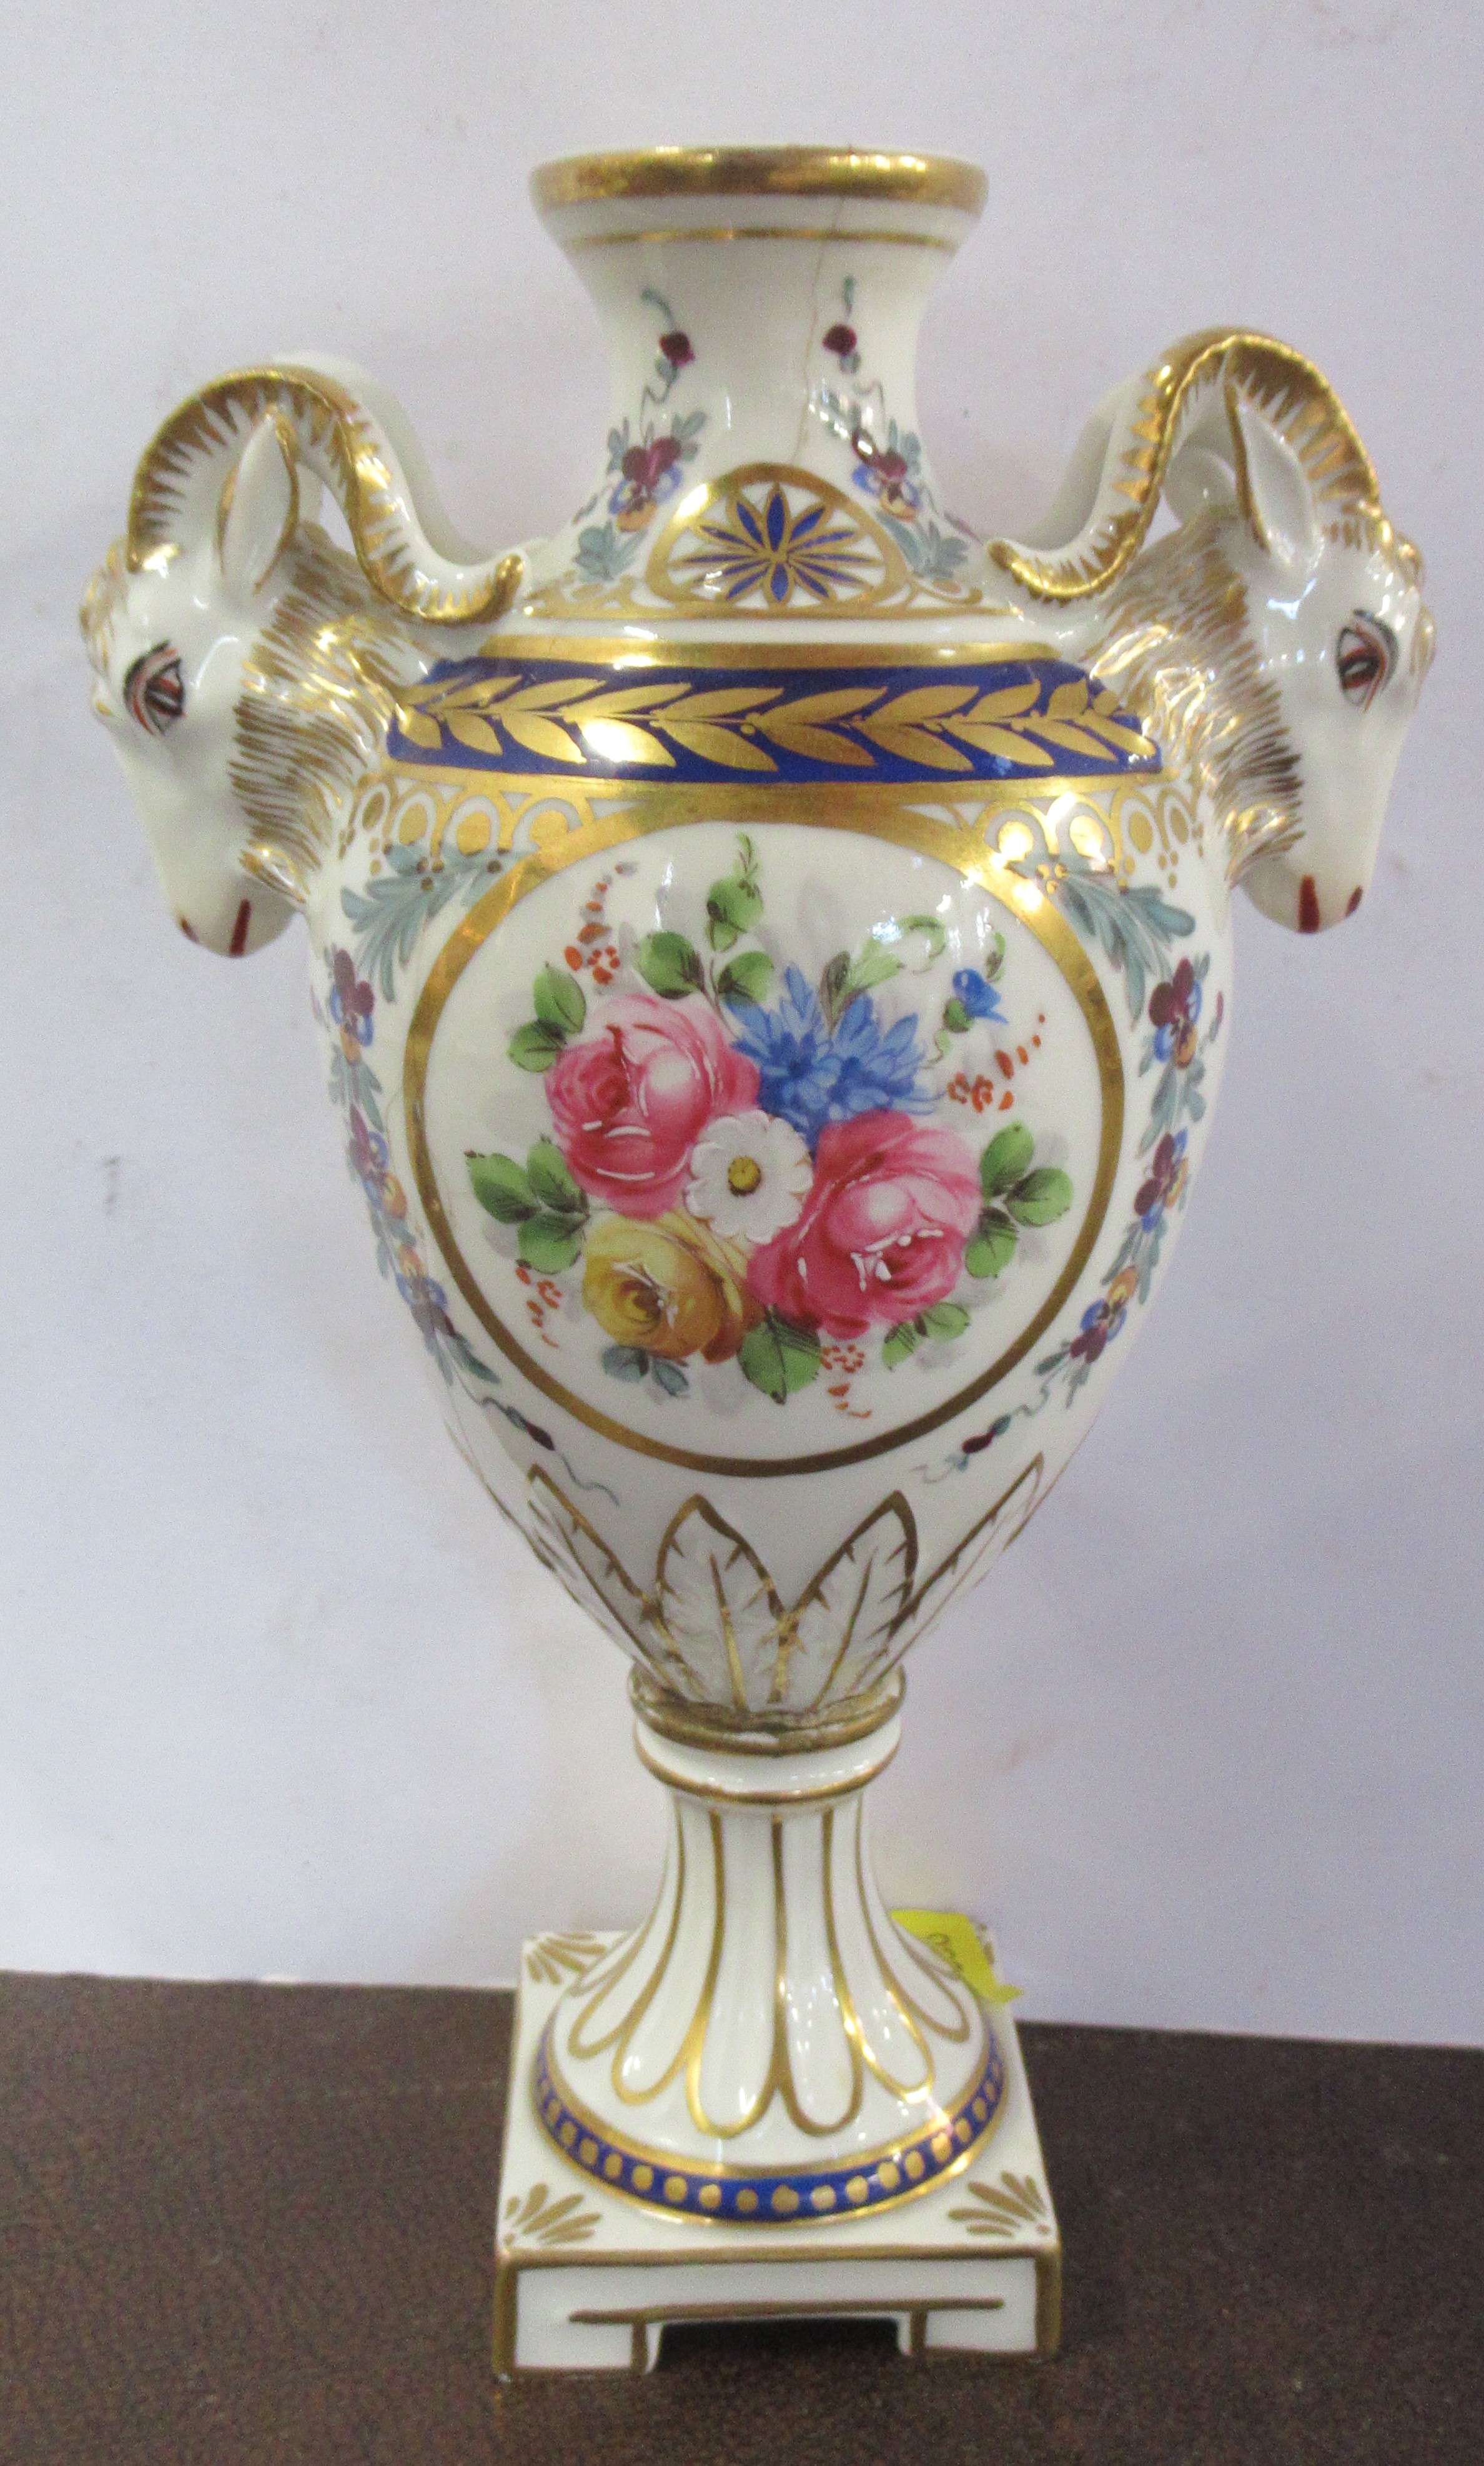 A 19th century Sevres porcelain pedestal vase, decorated with rams masks and flowers, af, height 7.